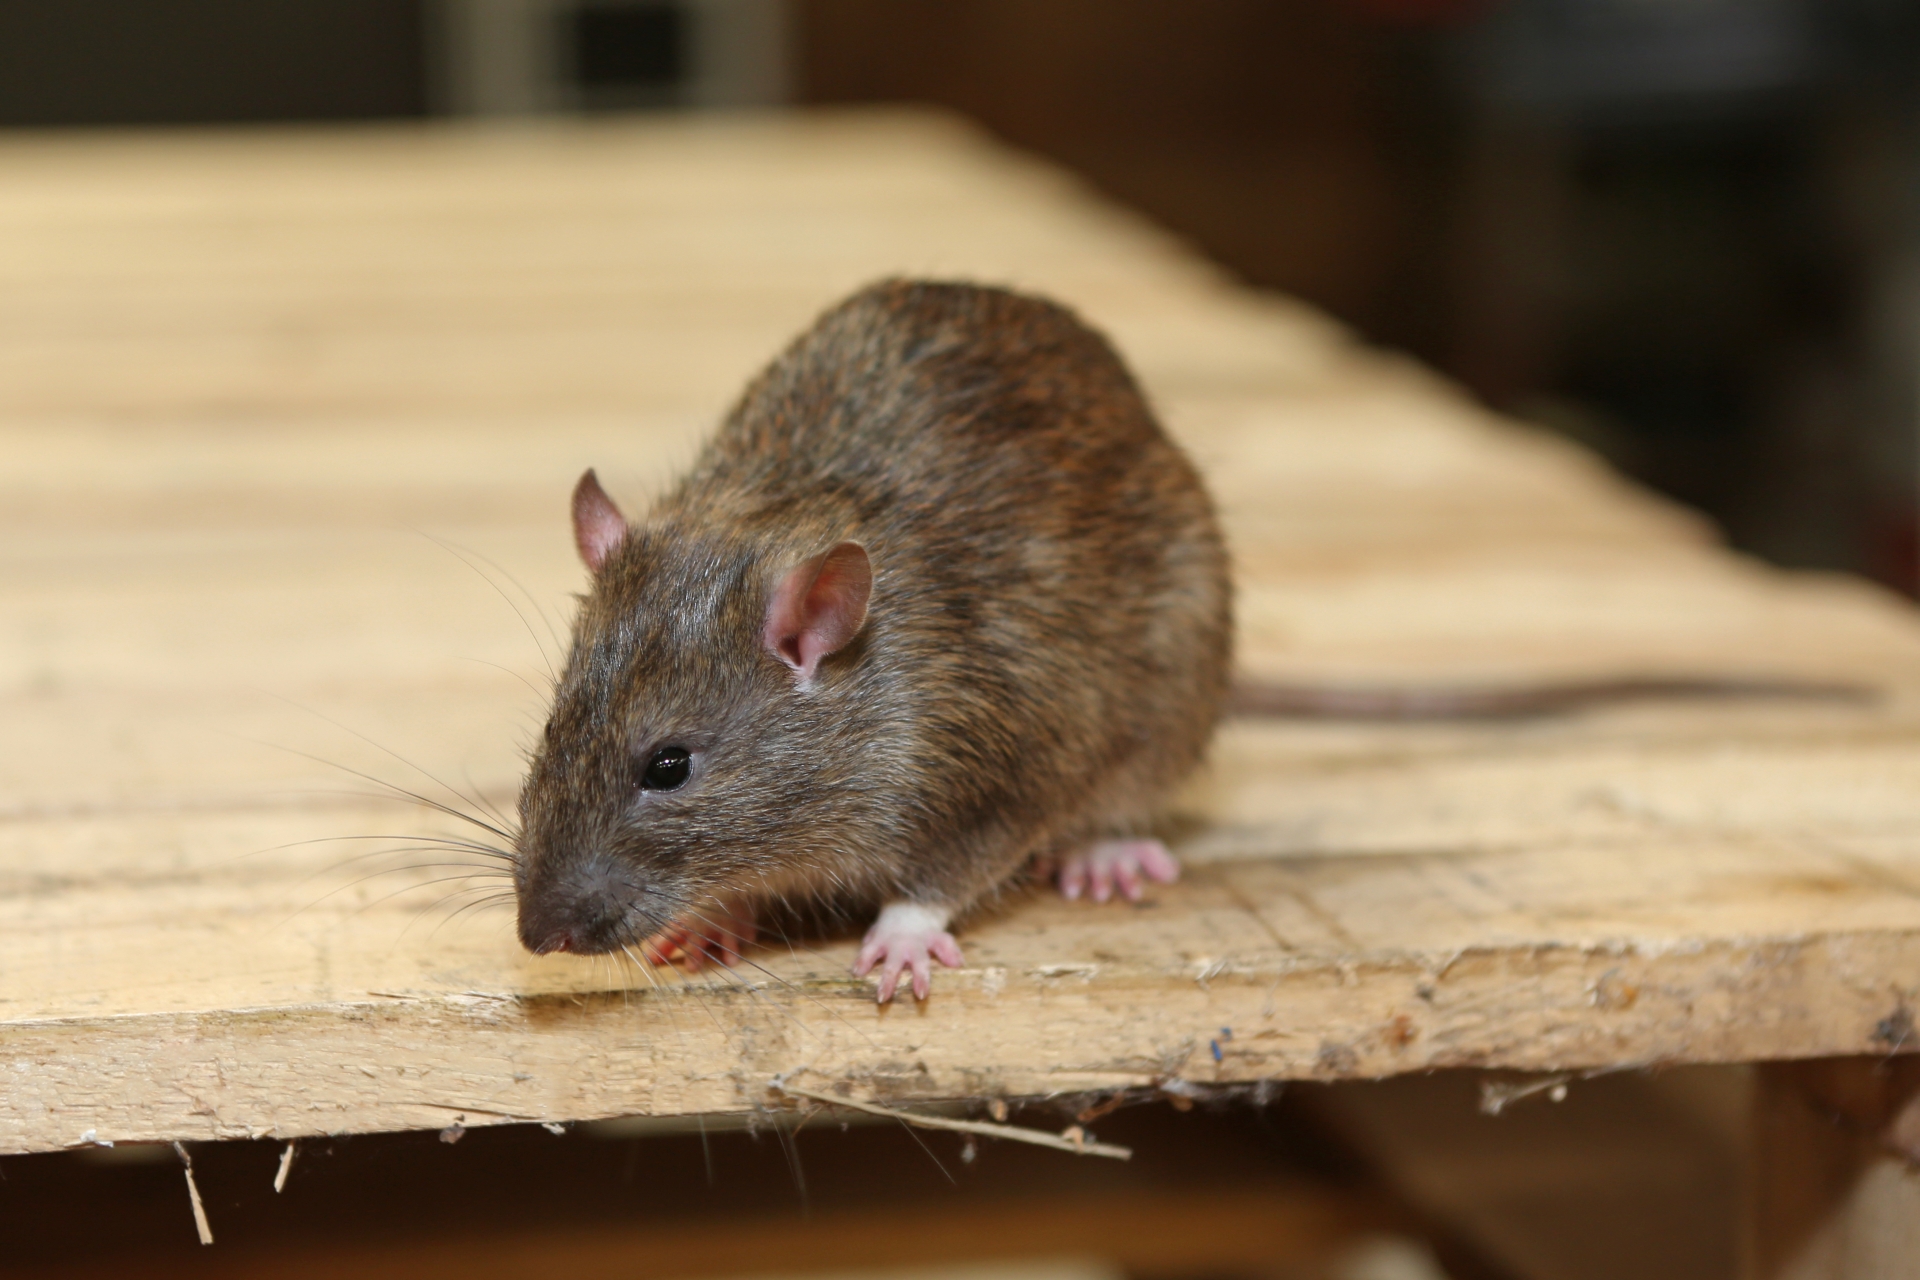 Rat Infestation, Pest Control in Southgate, N14. Call Now 020 8166 9746